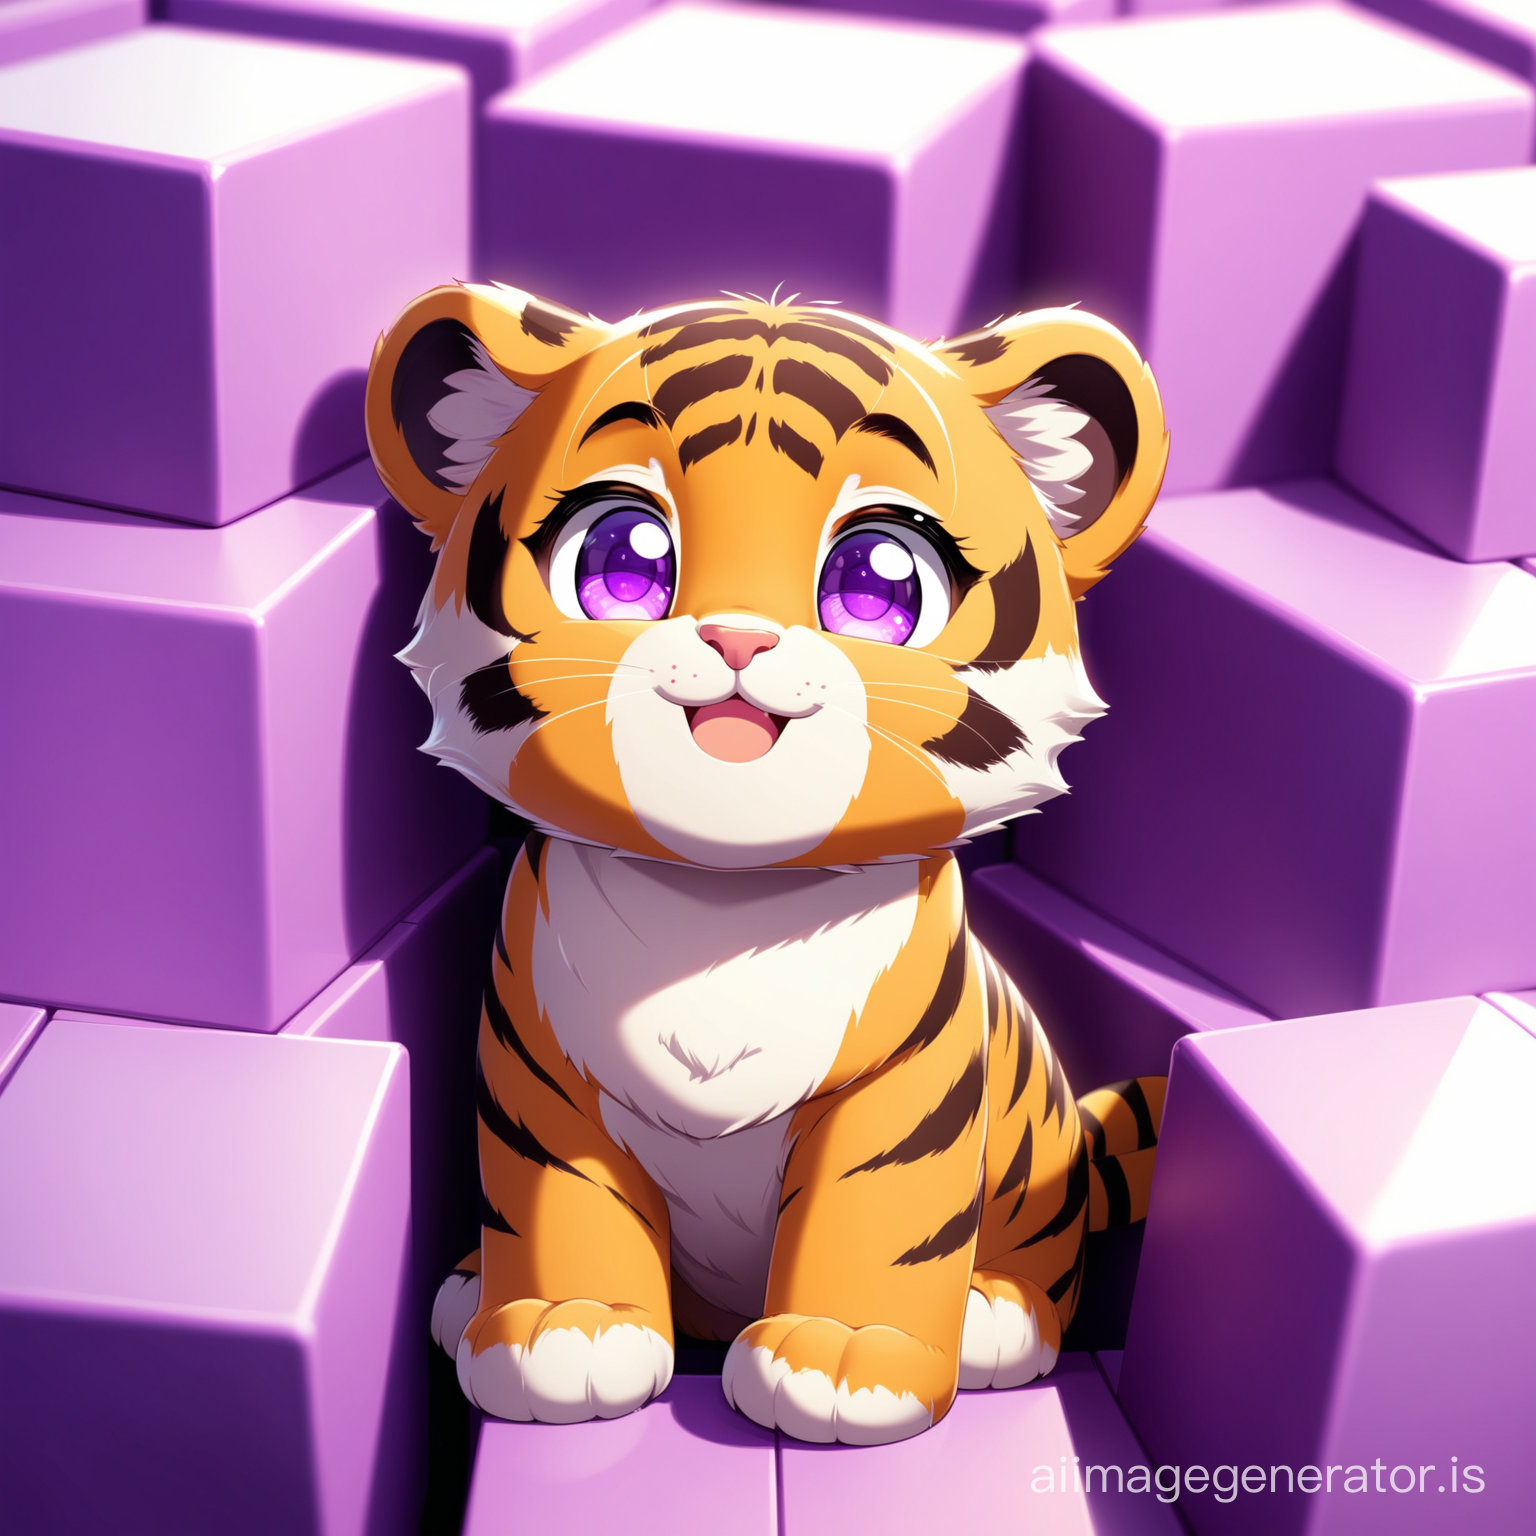 A little happy cute little tiger with purple eye and smile in india land with super detail and High Quality
big and purple blocks and floating are seen everywhere
Details are evident beautifully and with great precision